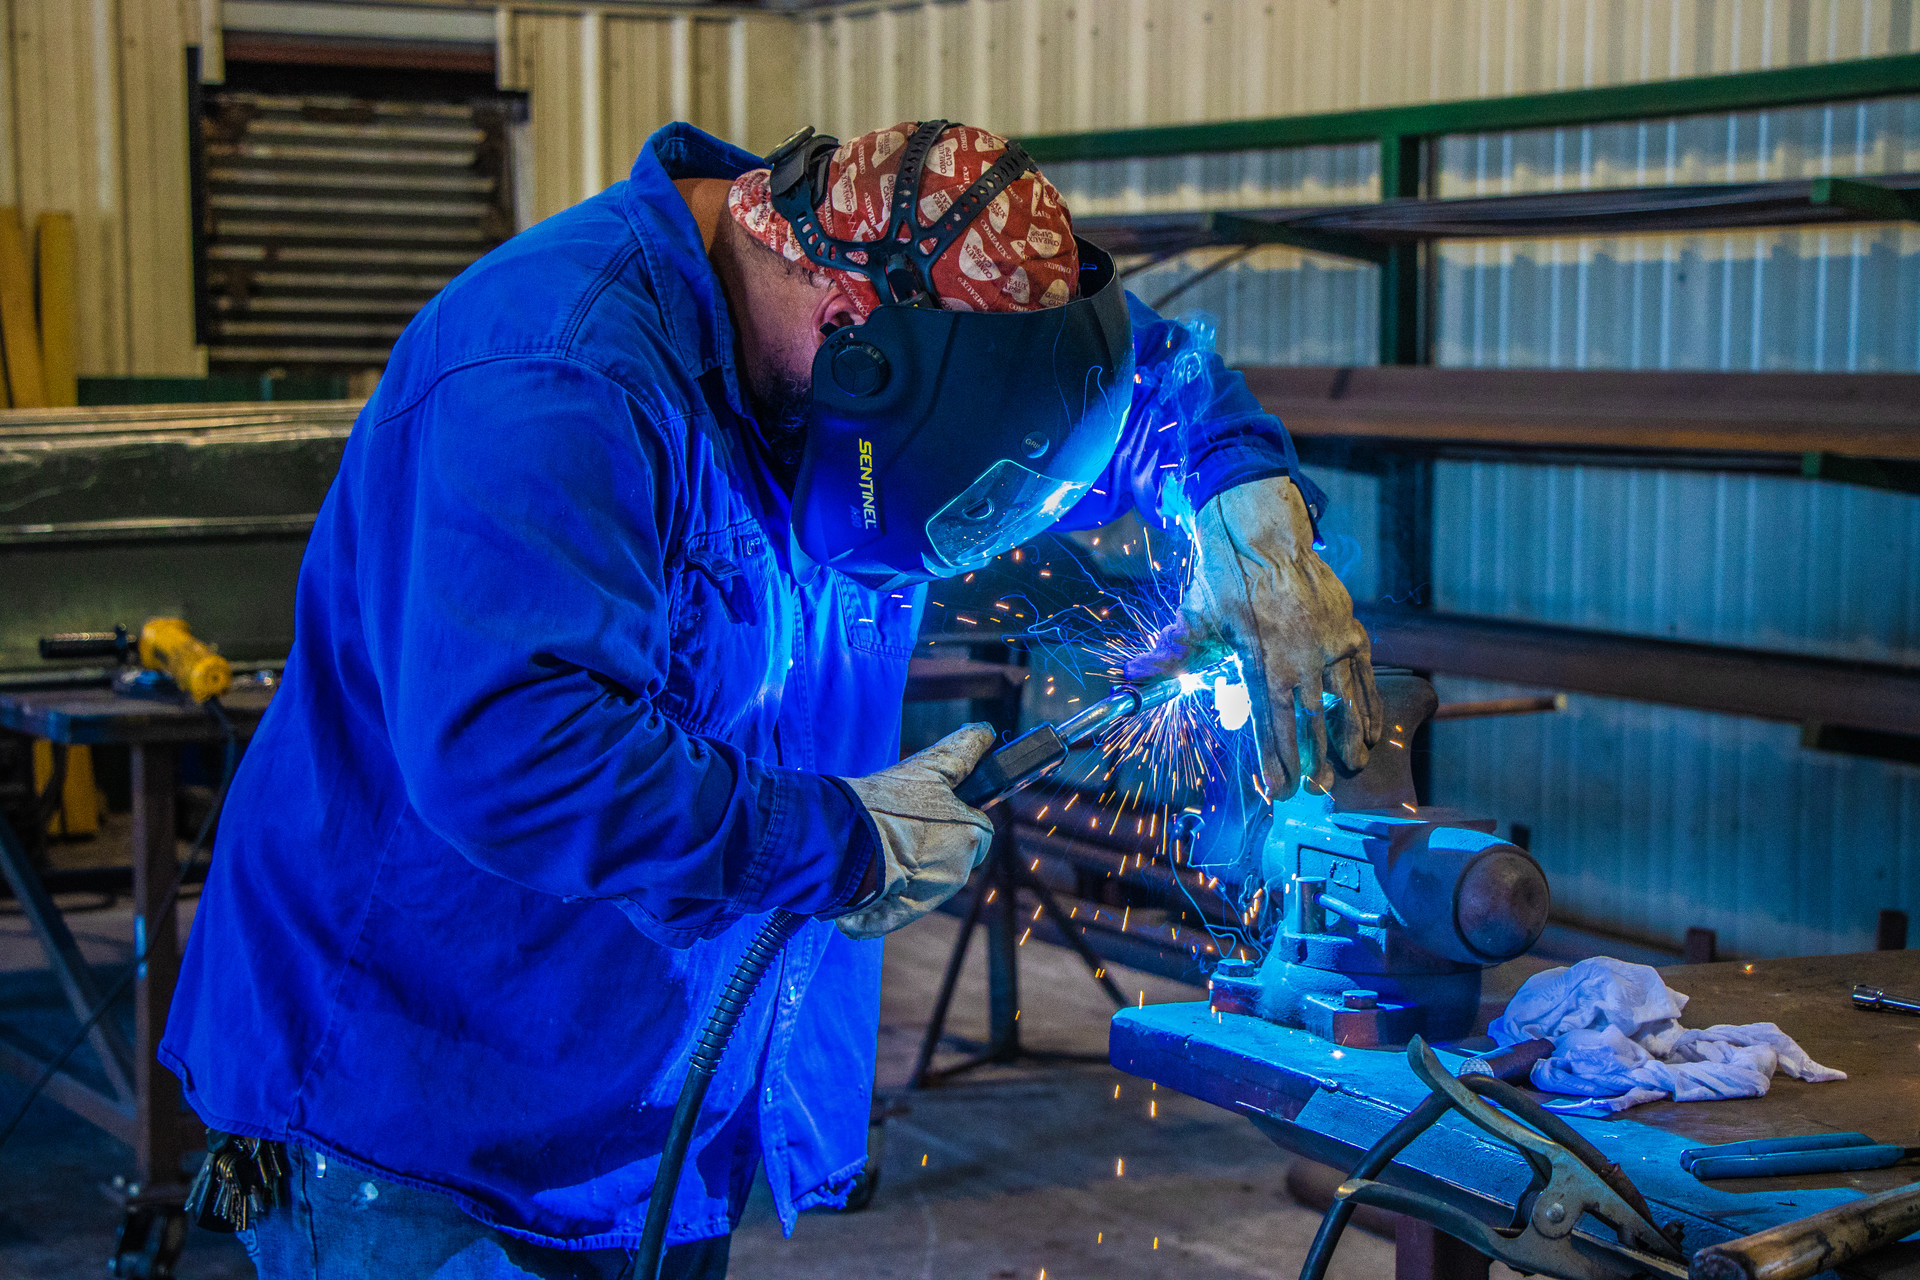 Man welding with welding mask and gear on